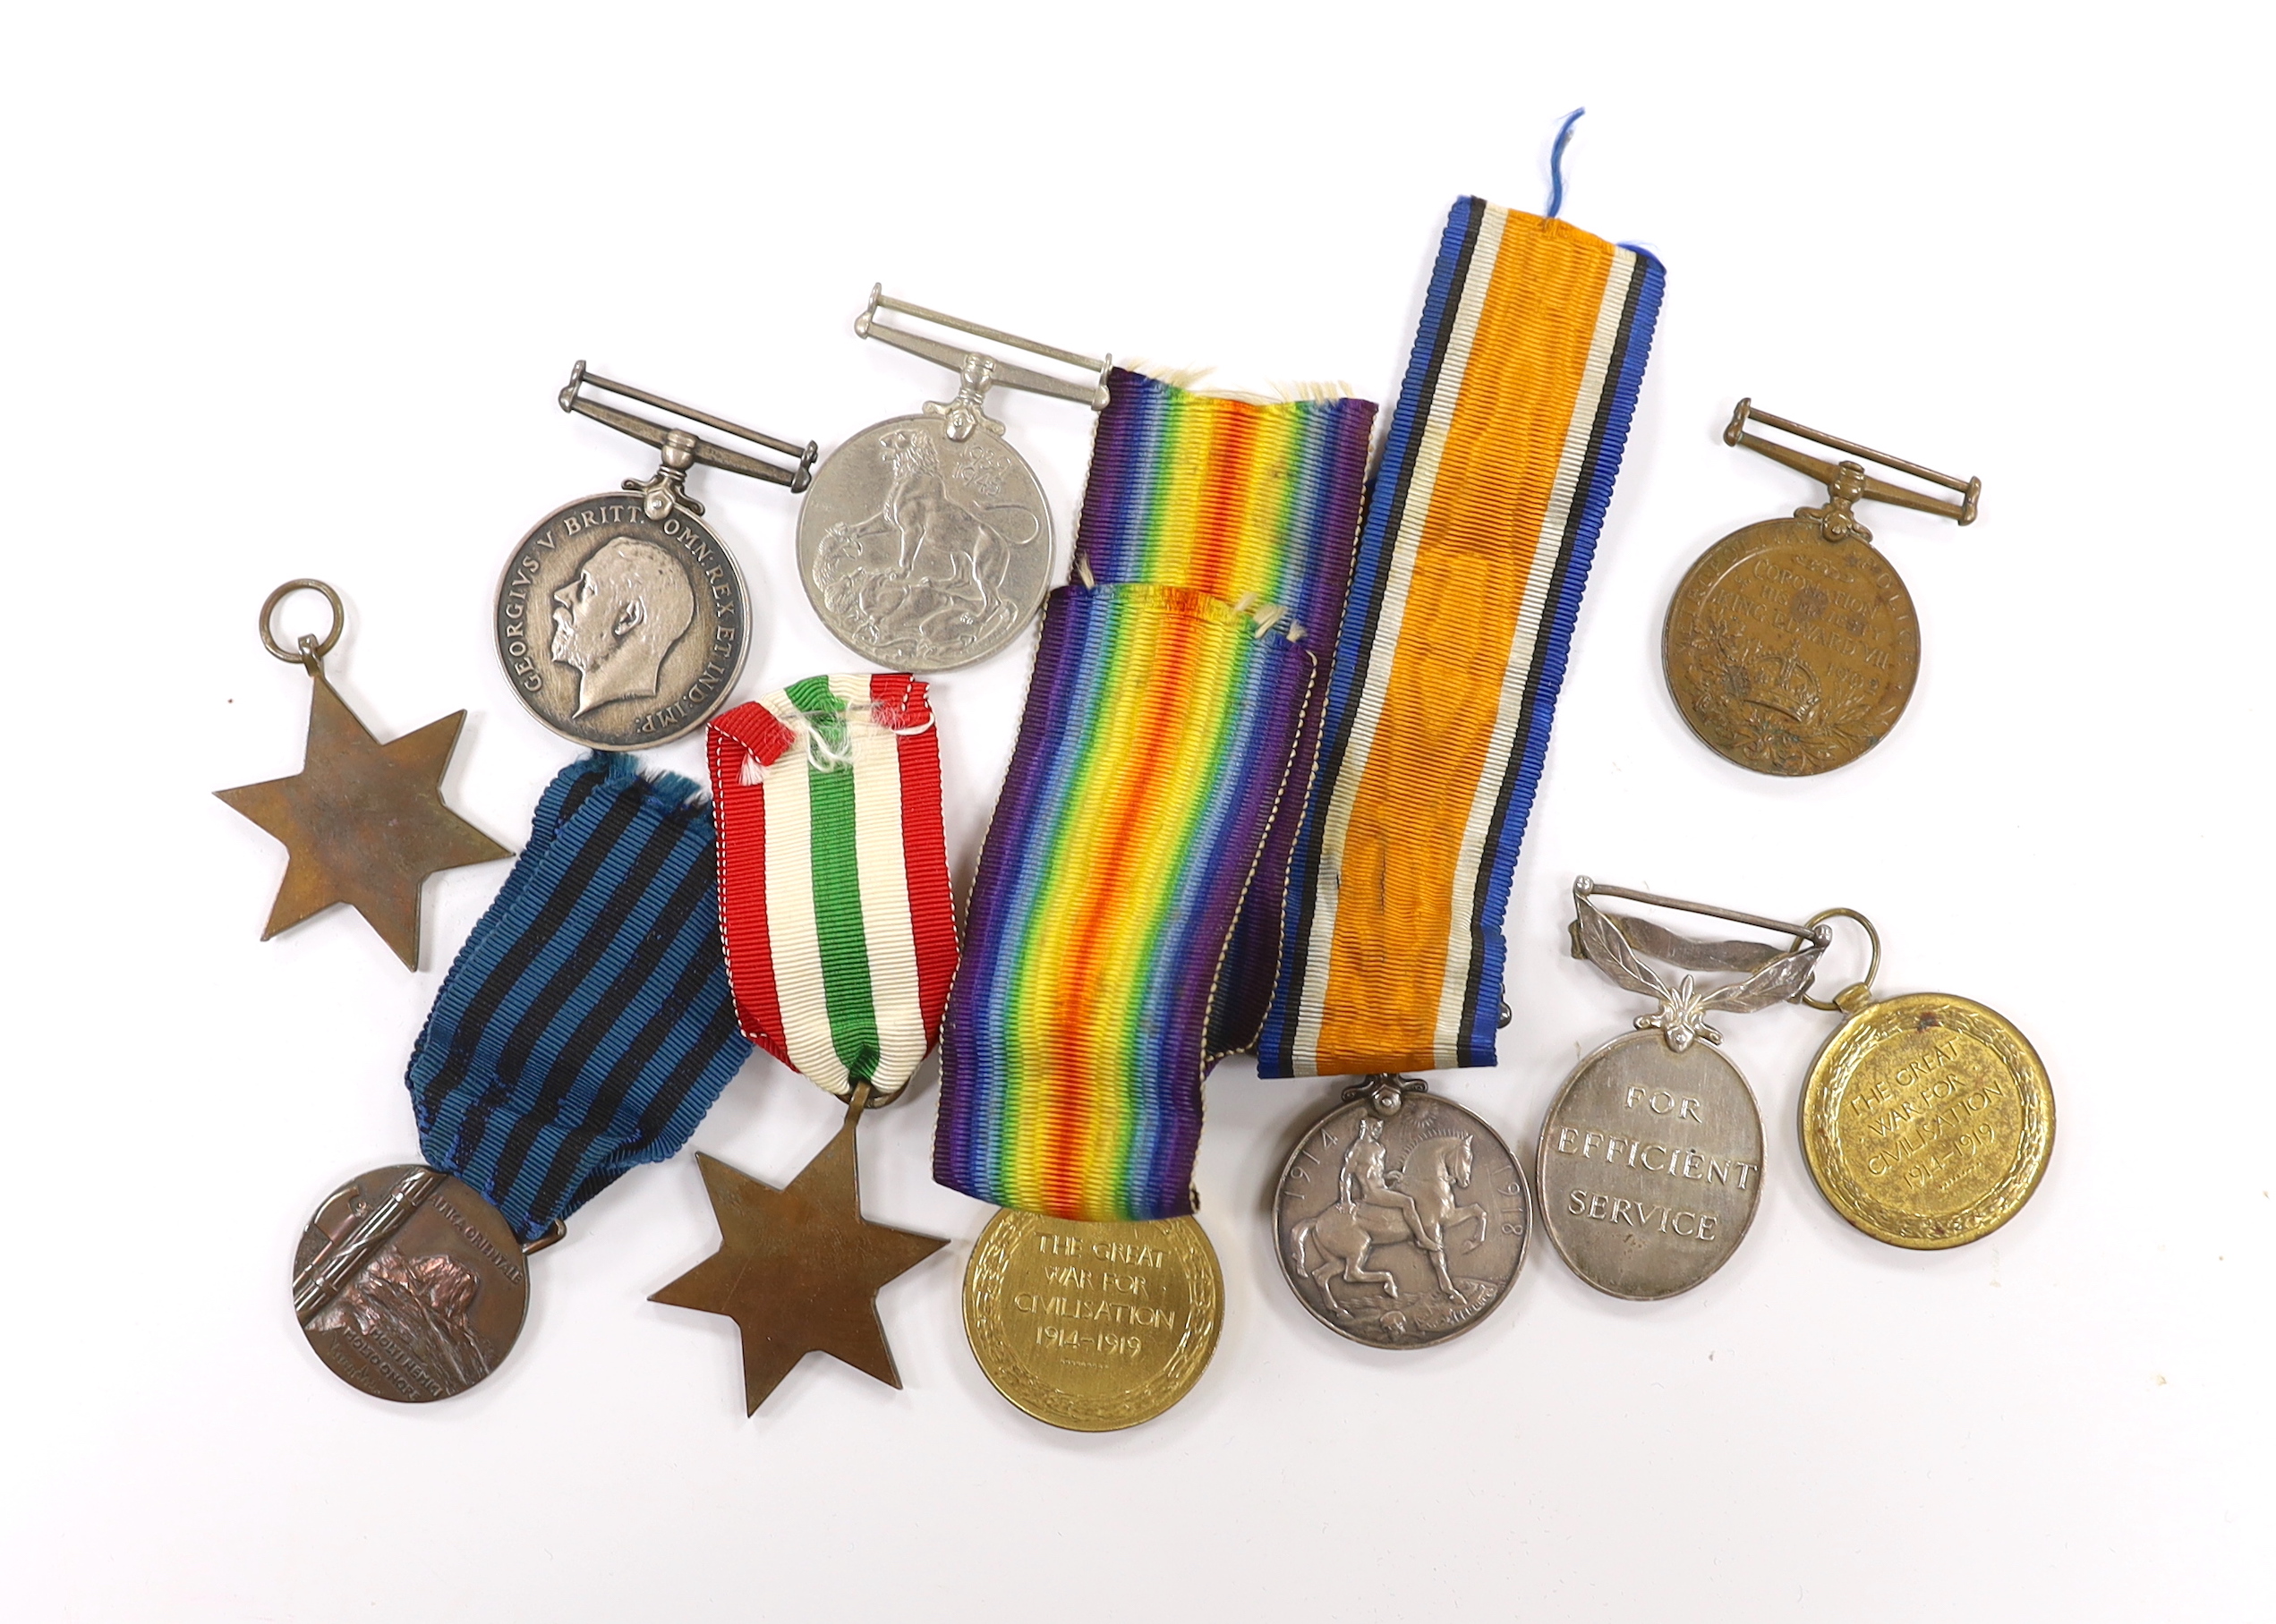 Ten medals; two First World War pairs of the Victory medal and the British War medal to Pte. F.J. Pulham 24 London Reg. and Pte. H. Cannell M.G.C., three WWII medals; The Italy Star, The 1939-1945 Star and a 1939-1945 Wa